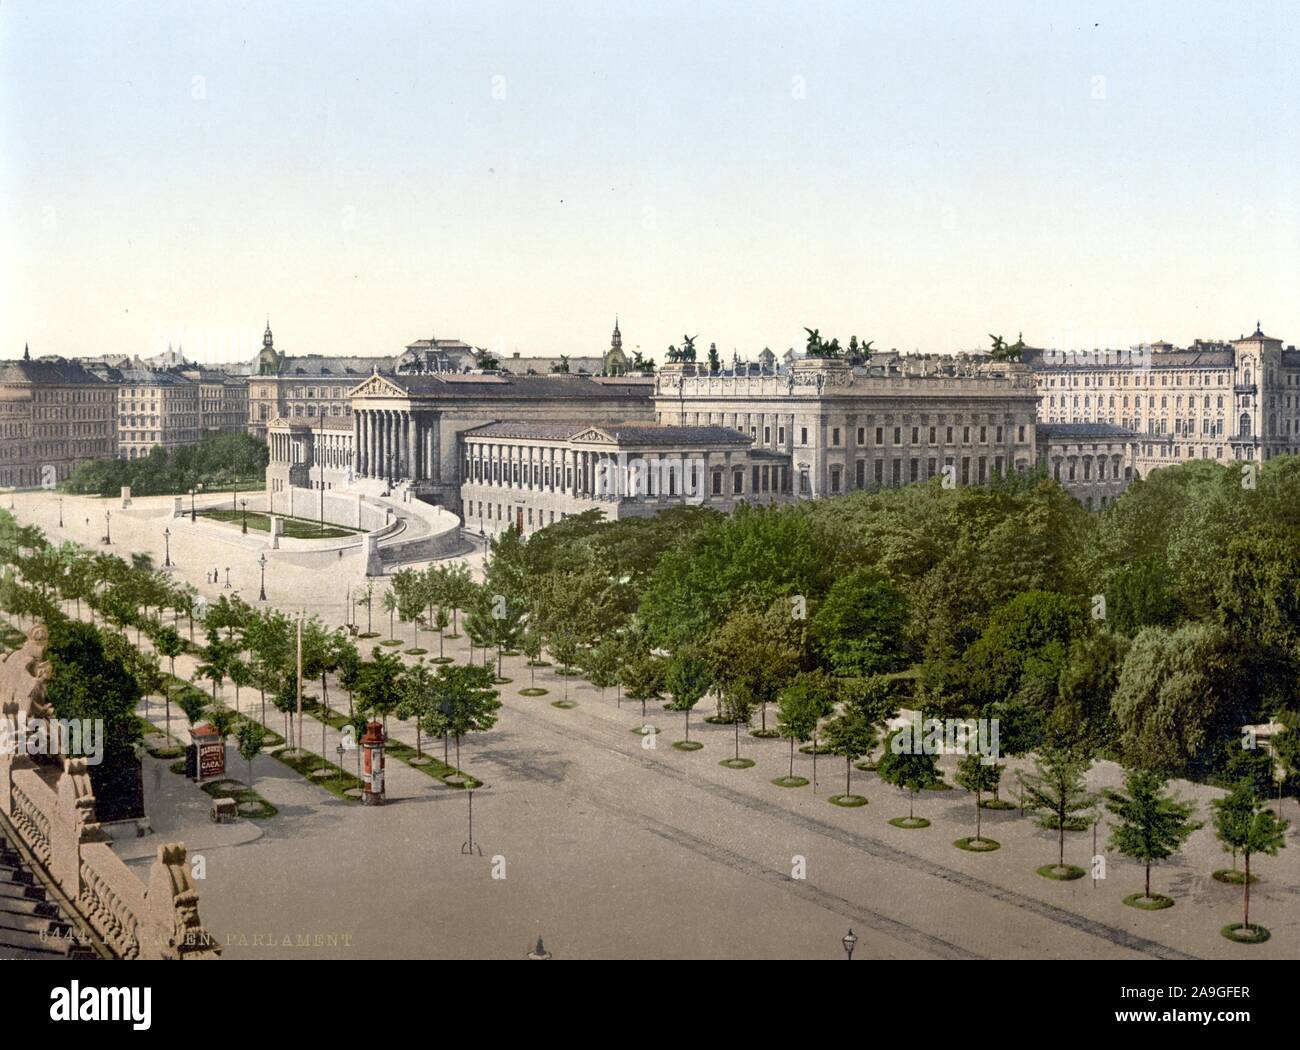 Wien, Ringstraße, Parlament um 1900 - Vienna, The Ring, Houses of  Parliament around 1900 Stock Photo - Alamy